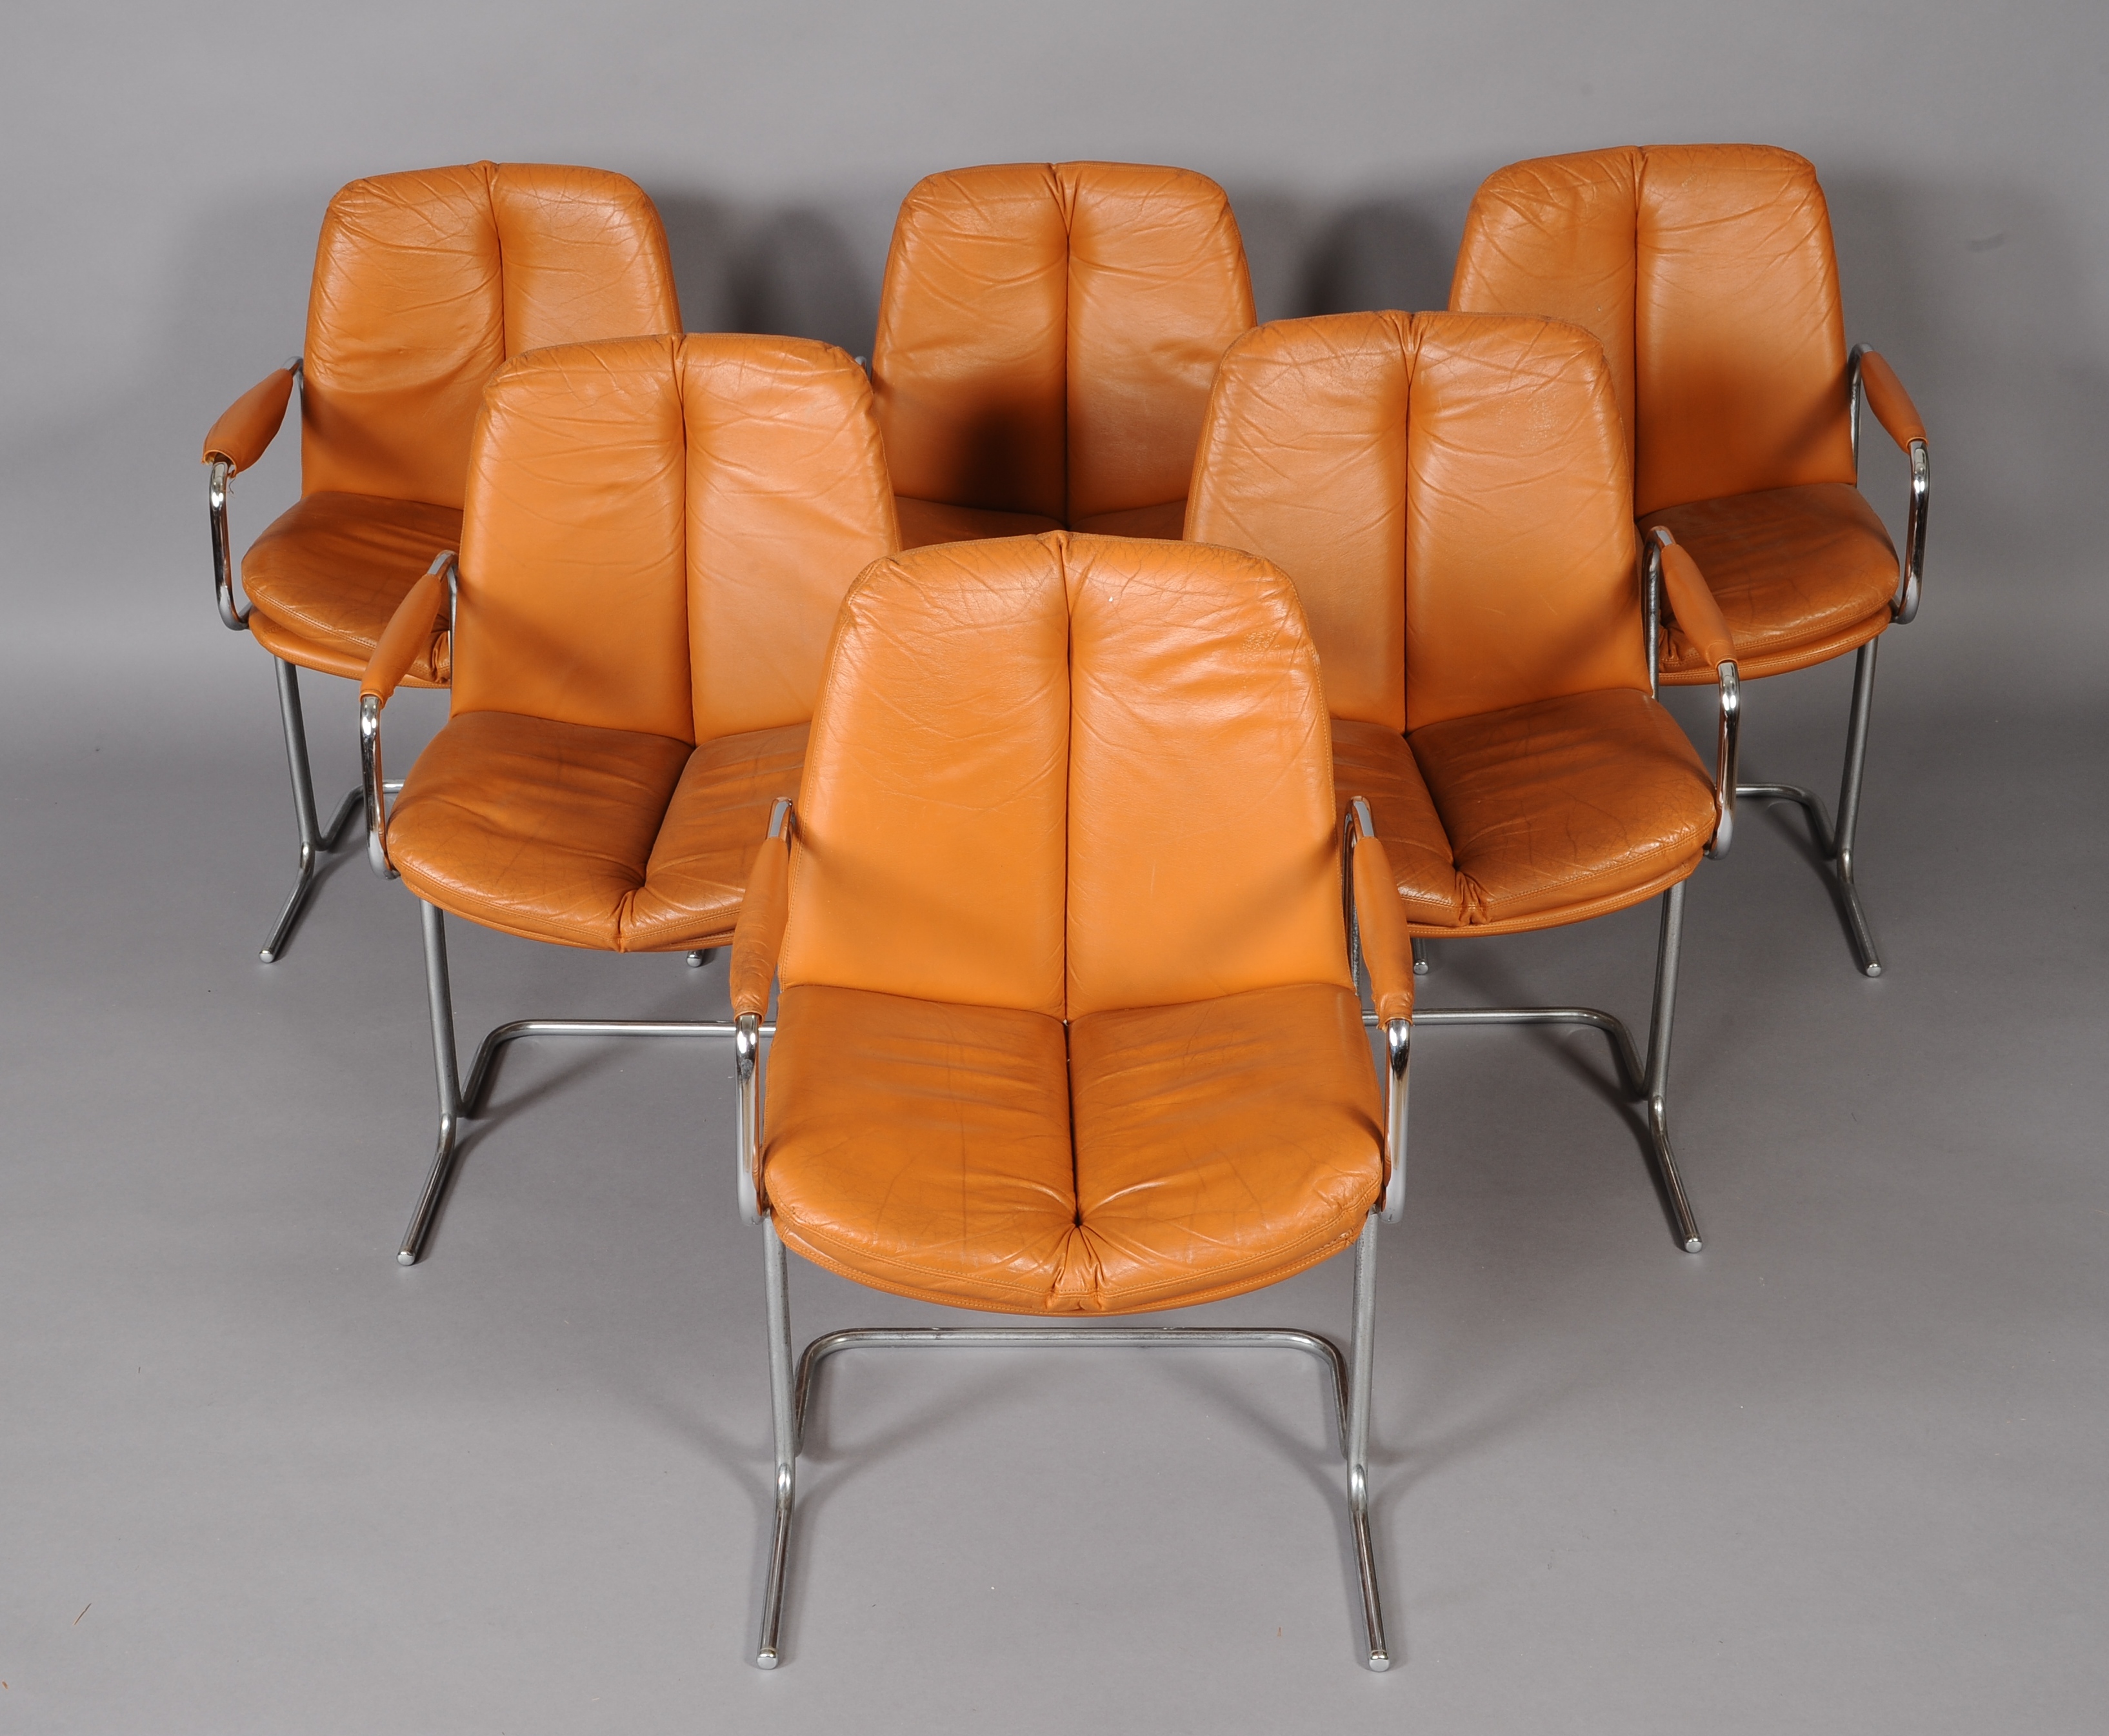 PIEFF OF WORCESTER c.1970s, set of six burnt orange leather and chrome armchairs, having